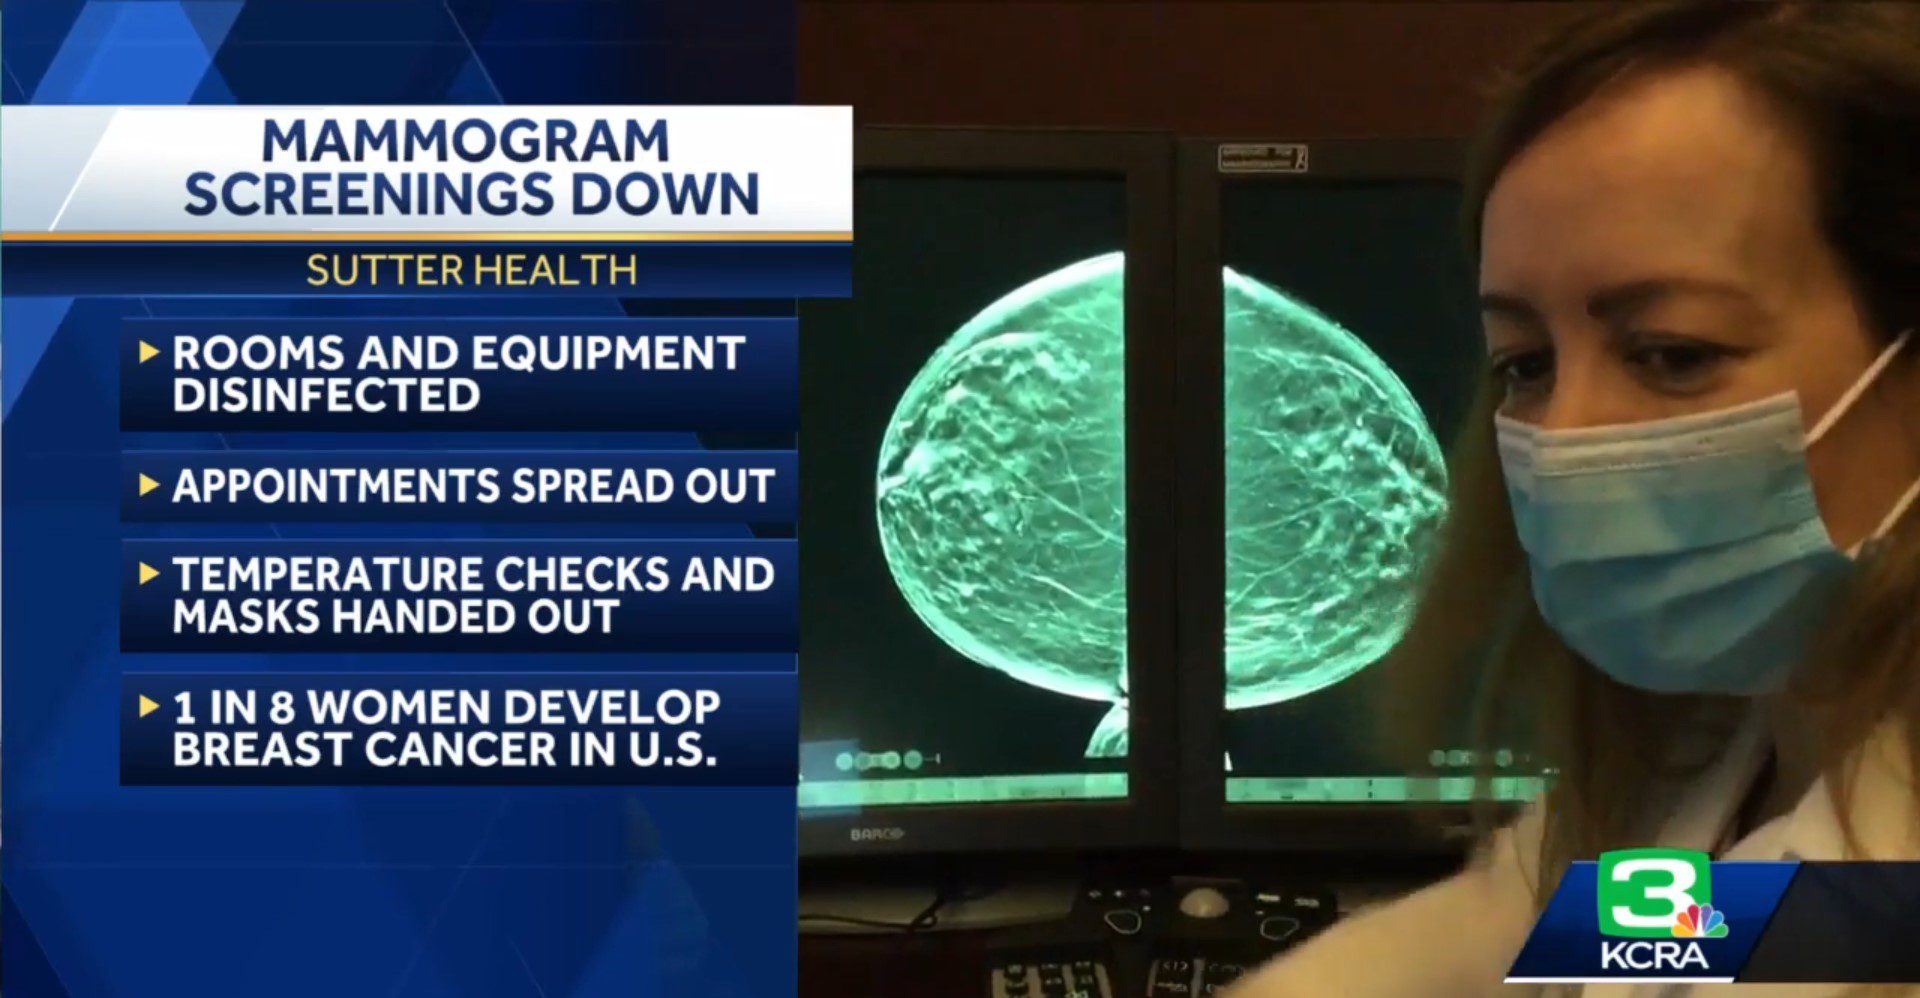 Dr. Miyuki Murphy on KCRA about the safety of mammograms at Sutter Imaging.